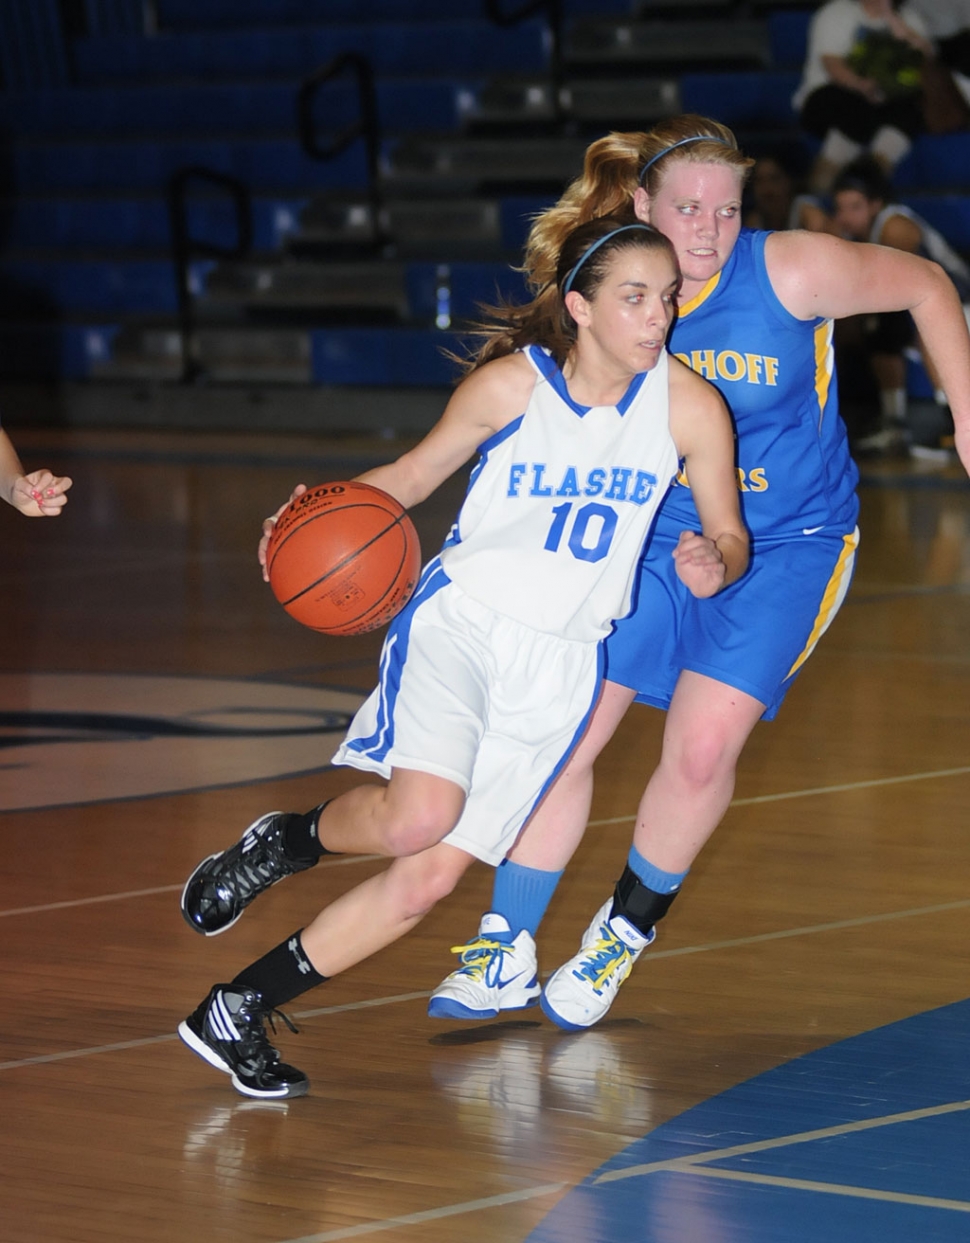 Ana Morino #10 dribbles around Nordoff to score. Fillmore lost to Nordoff 56-46. Anyssa Cabral had a game-high of 17 points and Jaynessa Lopez contributed 13. Fillmore’s next home games are Thursday, January 26th against Saint Bonaventure, and Saturday, January 28th against Oaks Christian.